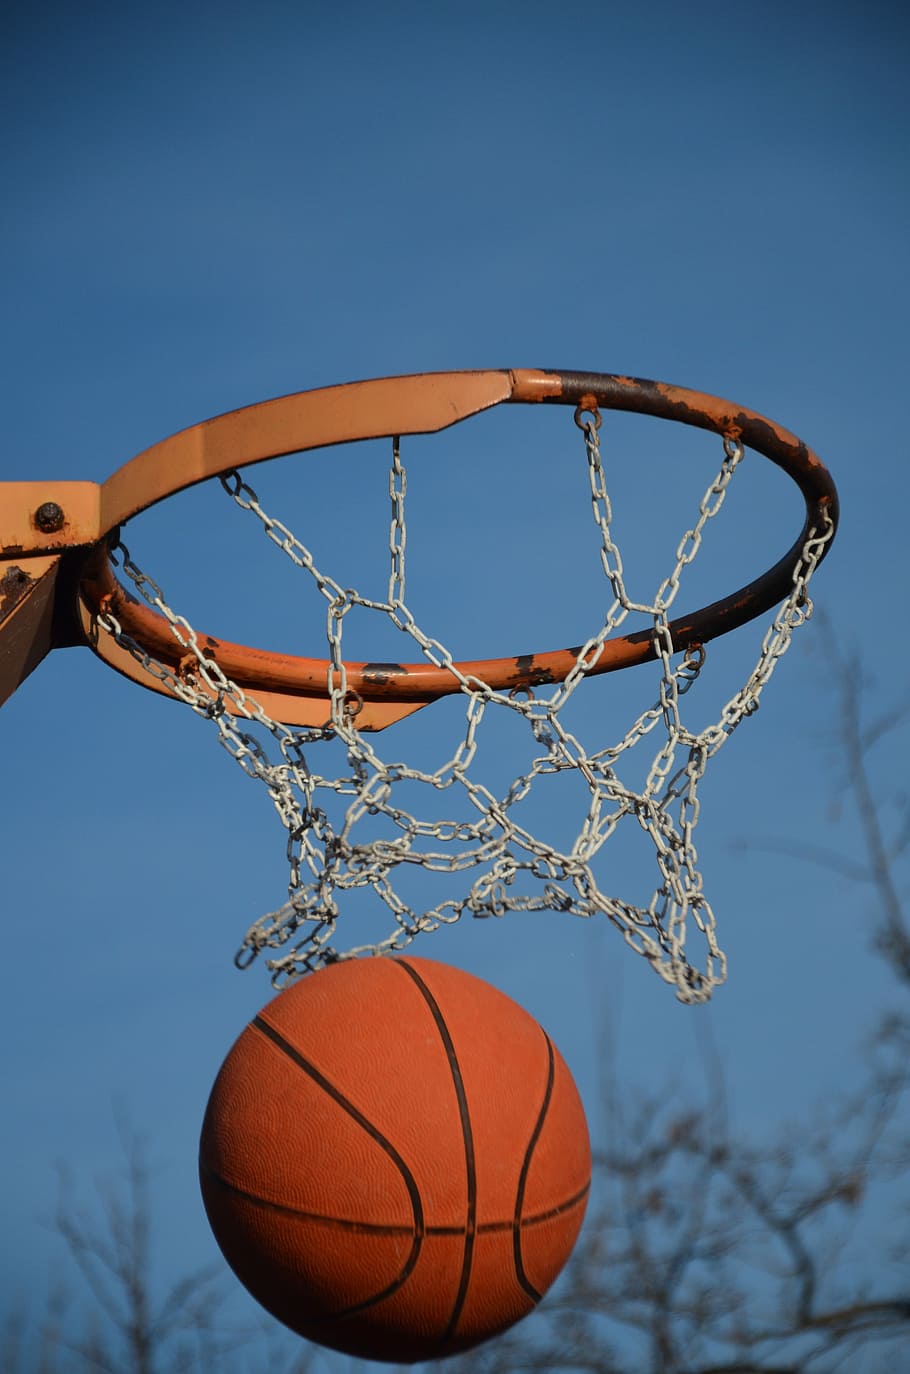 Basketball, Ball, Sport, Sport, Game, competition, play, equipment